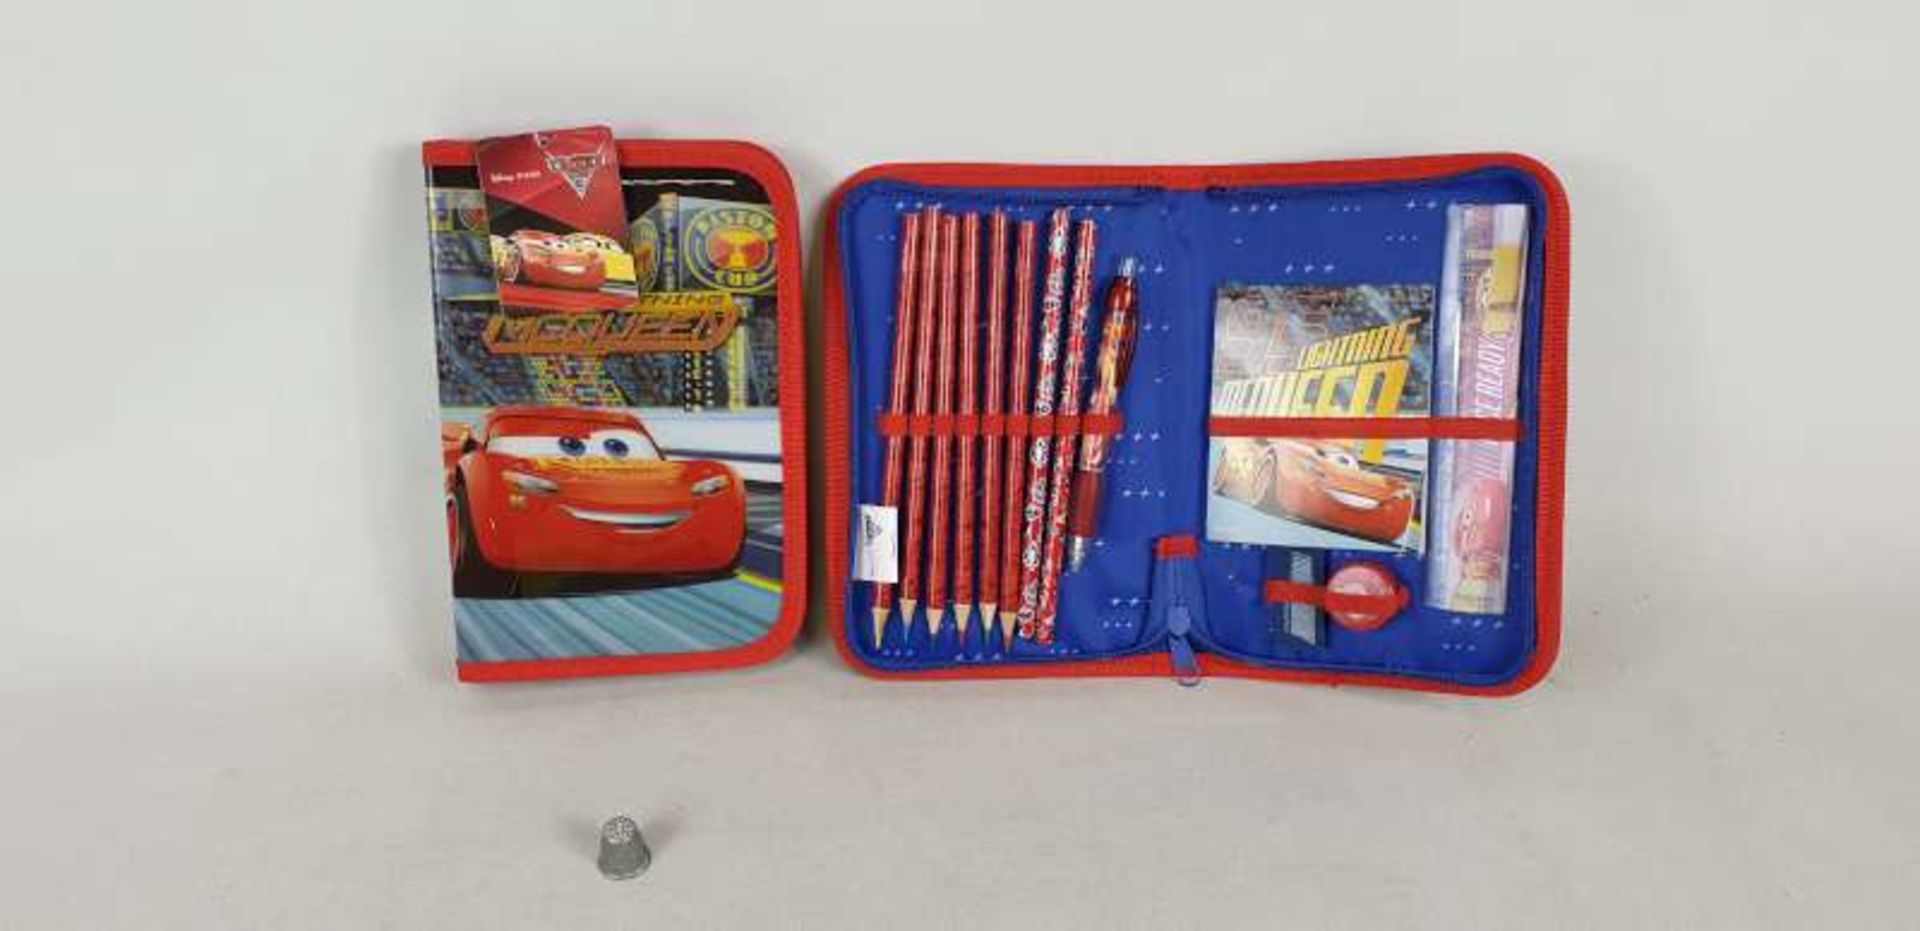 48 X DISNEY PIXAR CARS 3 FILLED PENCIL CASES IN 2 BOXES